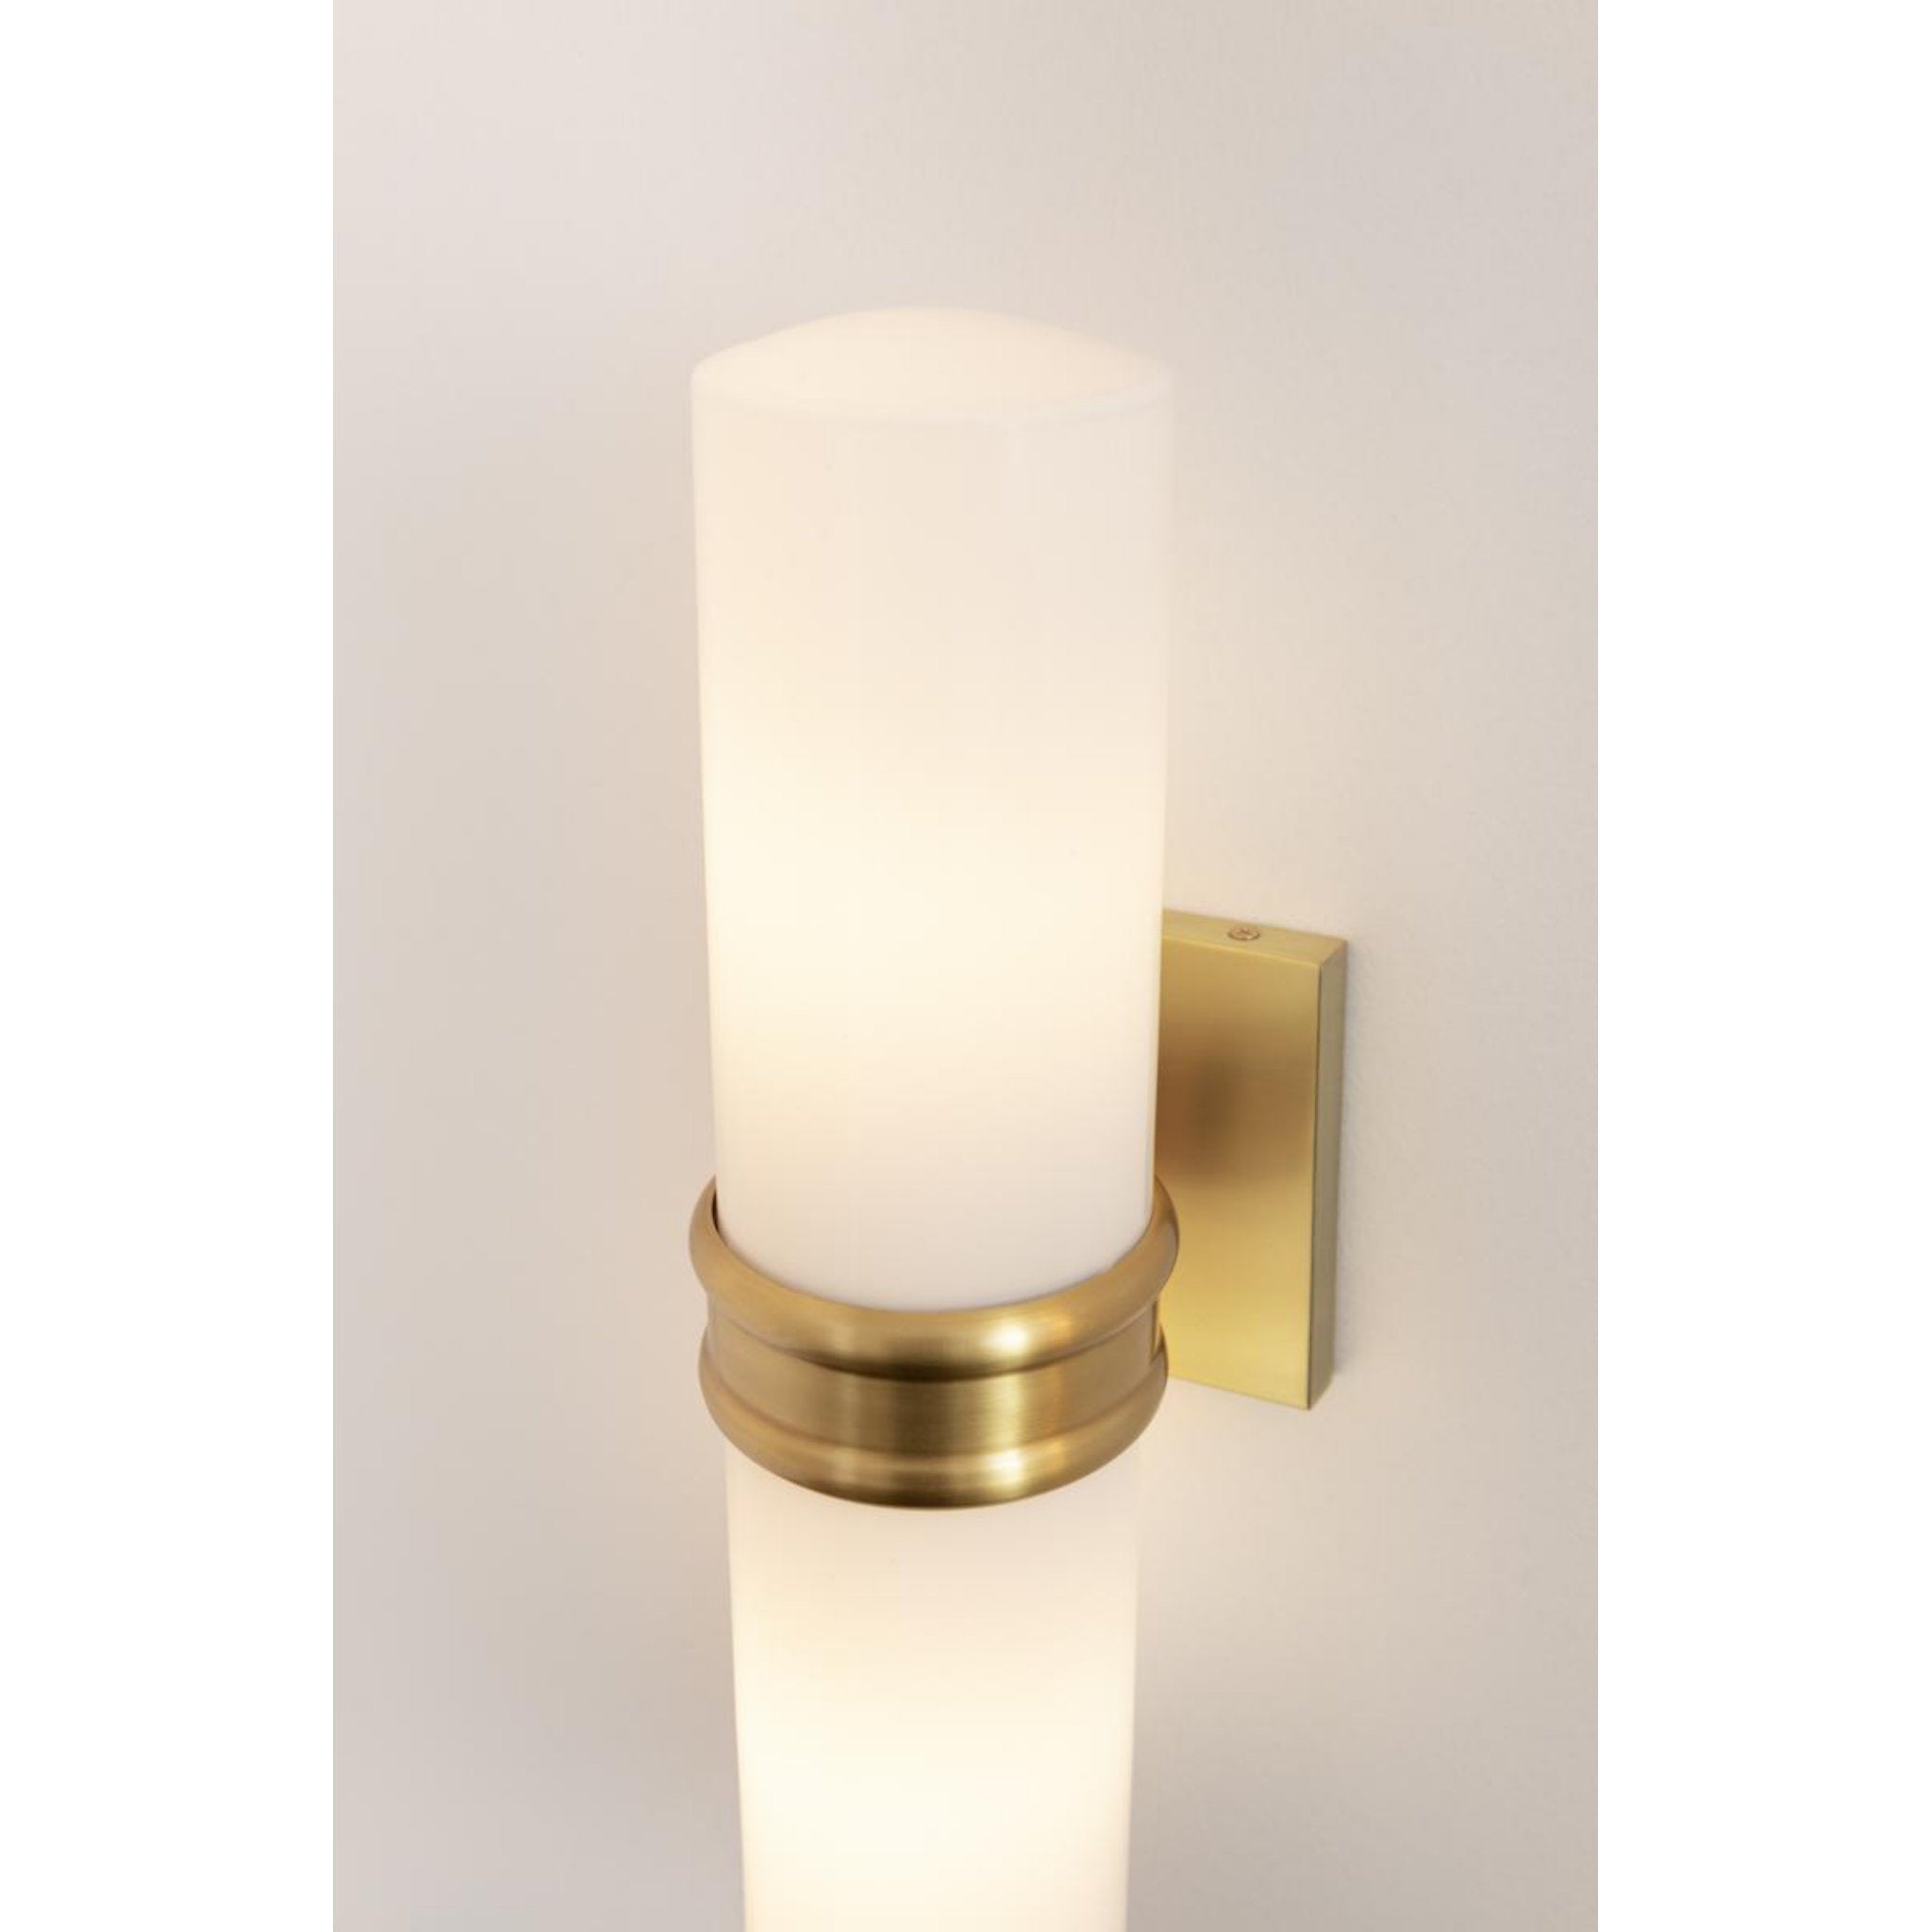 Natalie 2-Light Wall Sconce in Polished Nickel by Justin Crocker